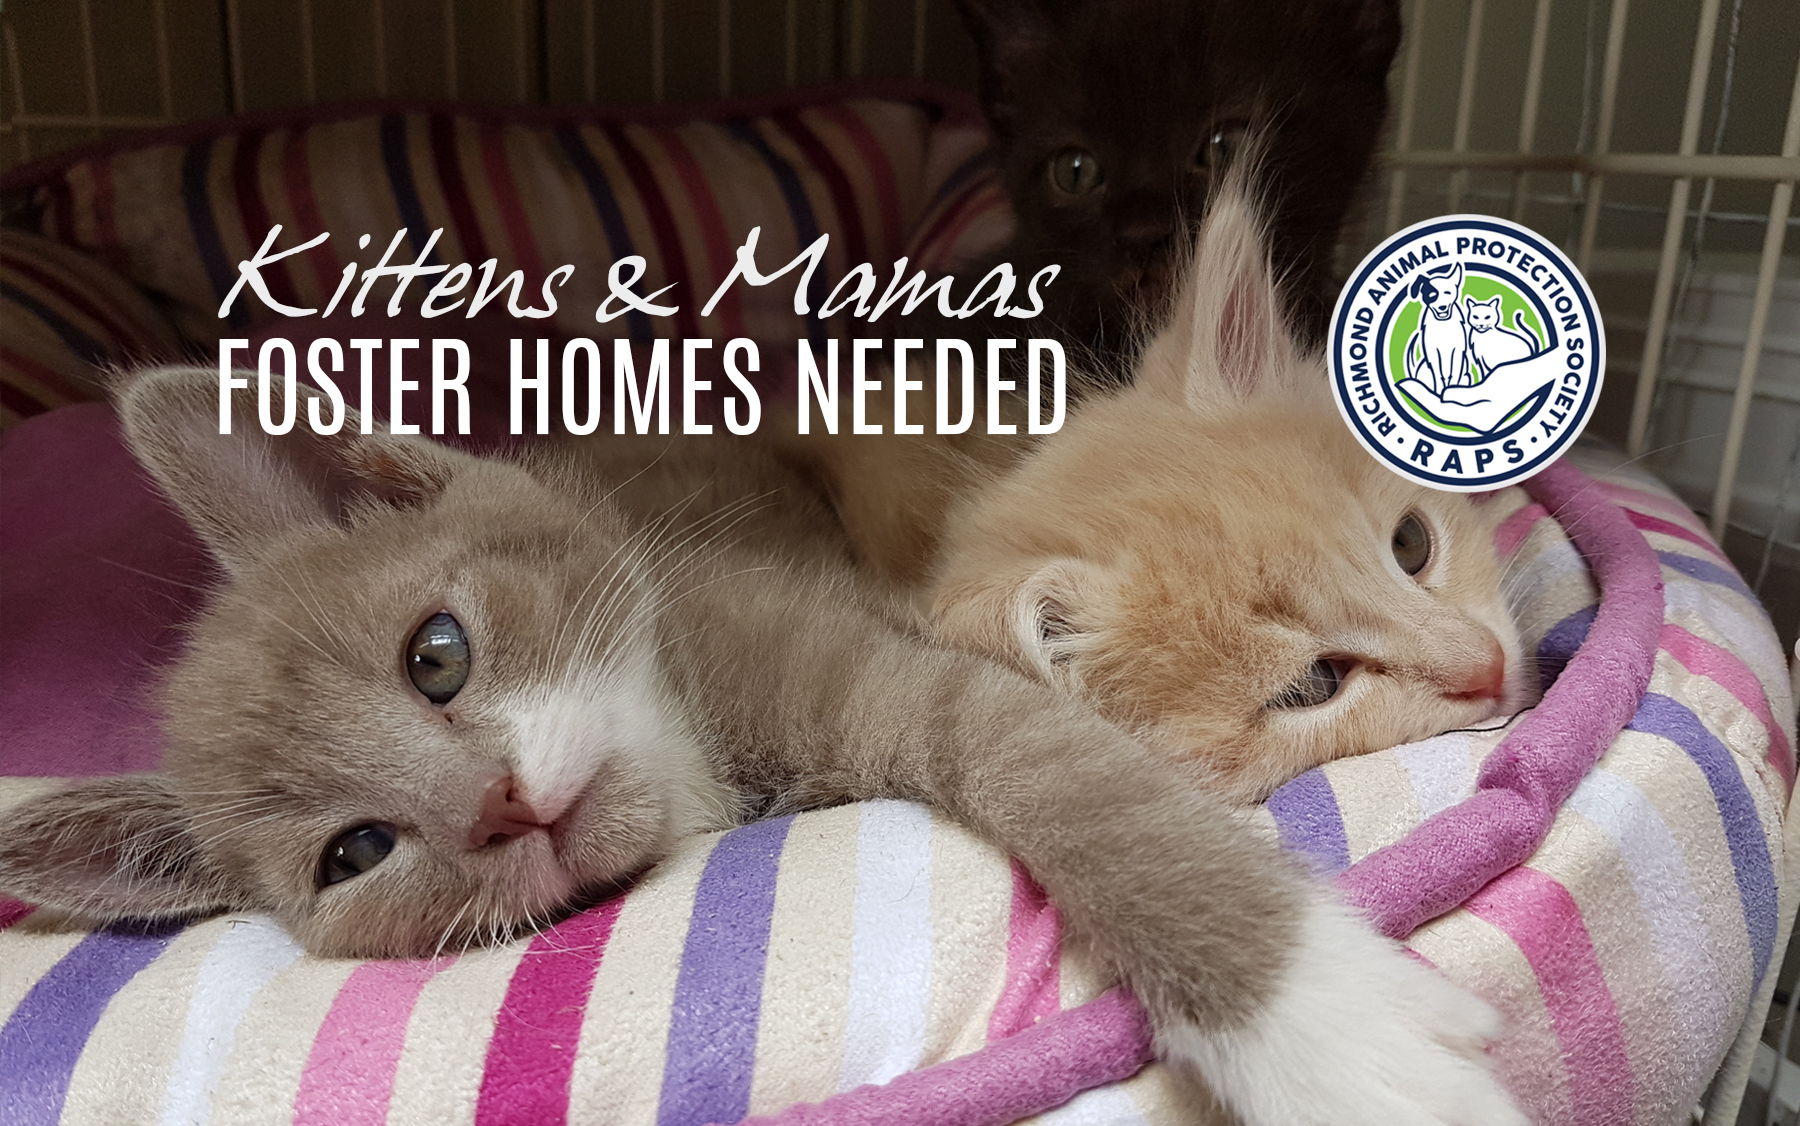 Spring’s sprung and we need foster homes for kittens and mamas